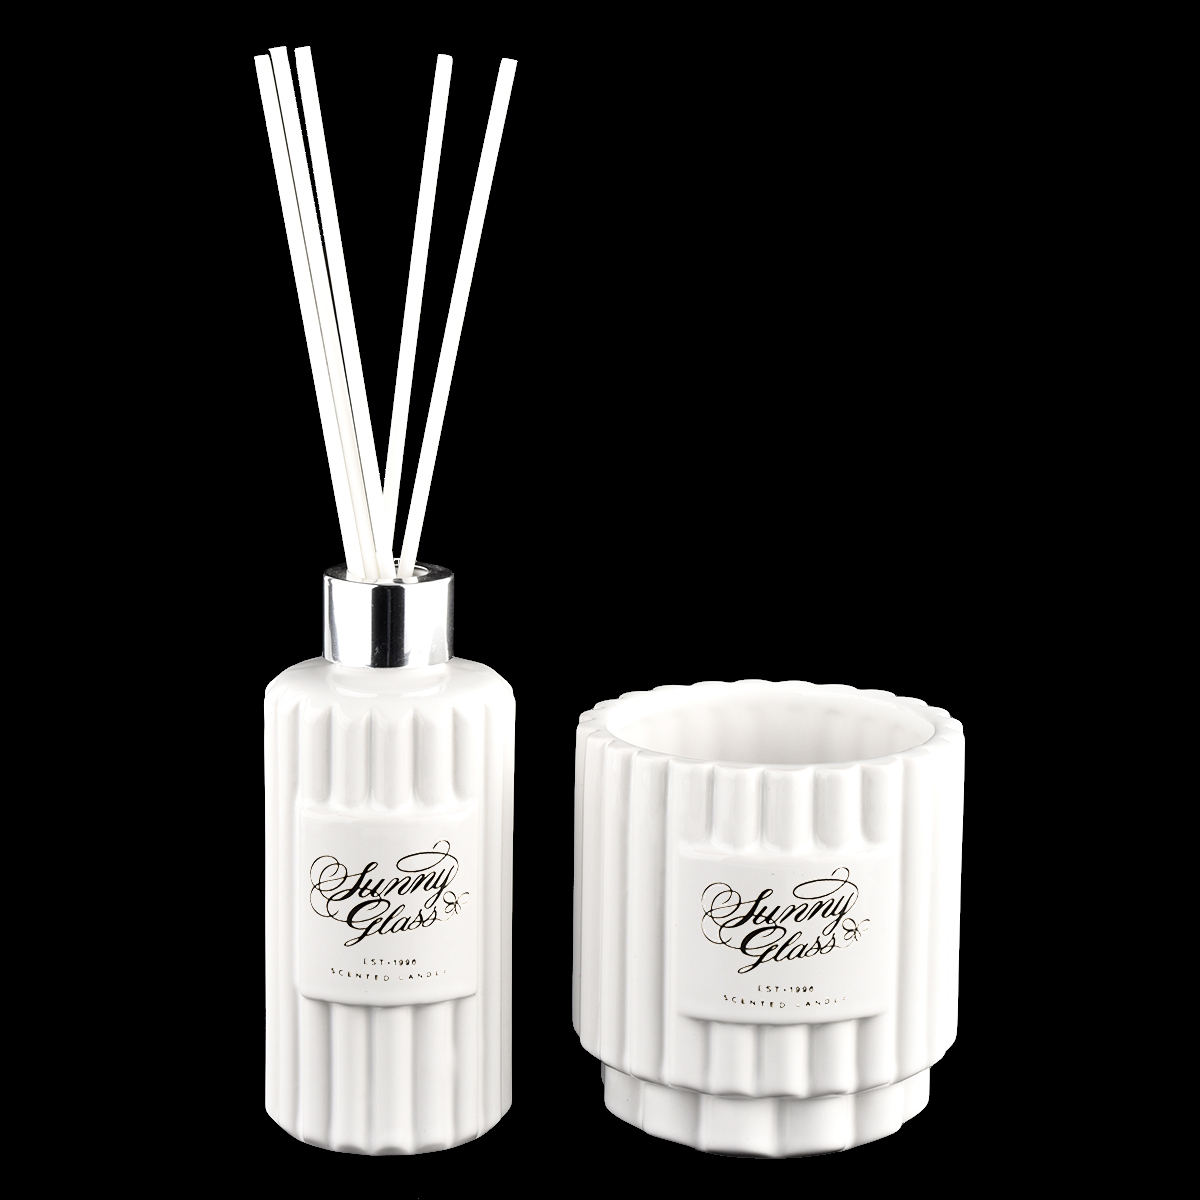 Newly design 410ml ceramic candle holder and match diffuser bottle for wholesale